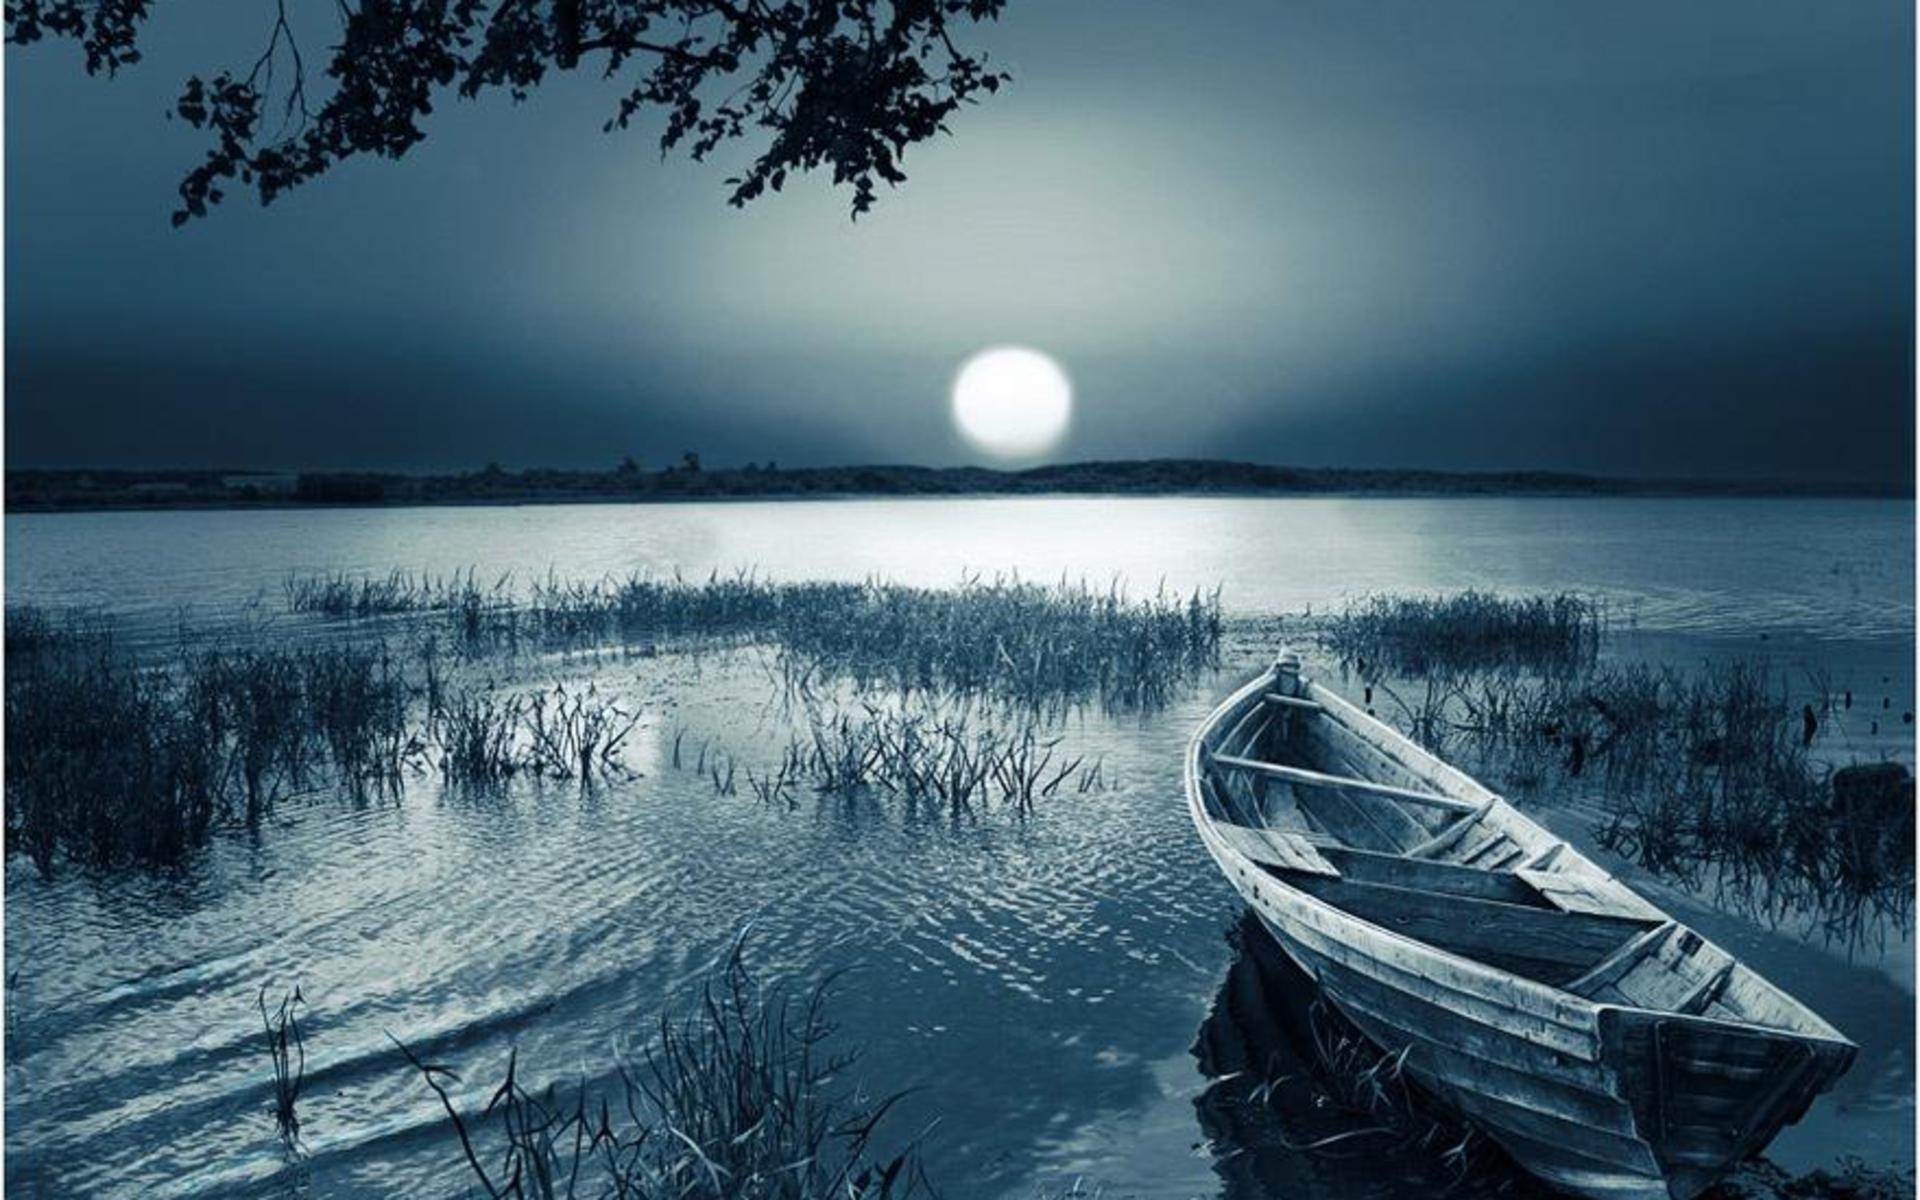 A picture of a lone boat on a lake in the darkness.